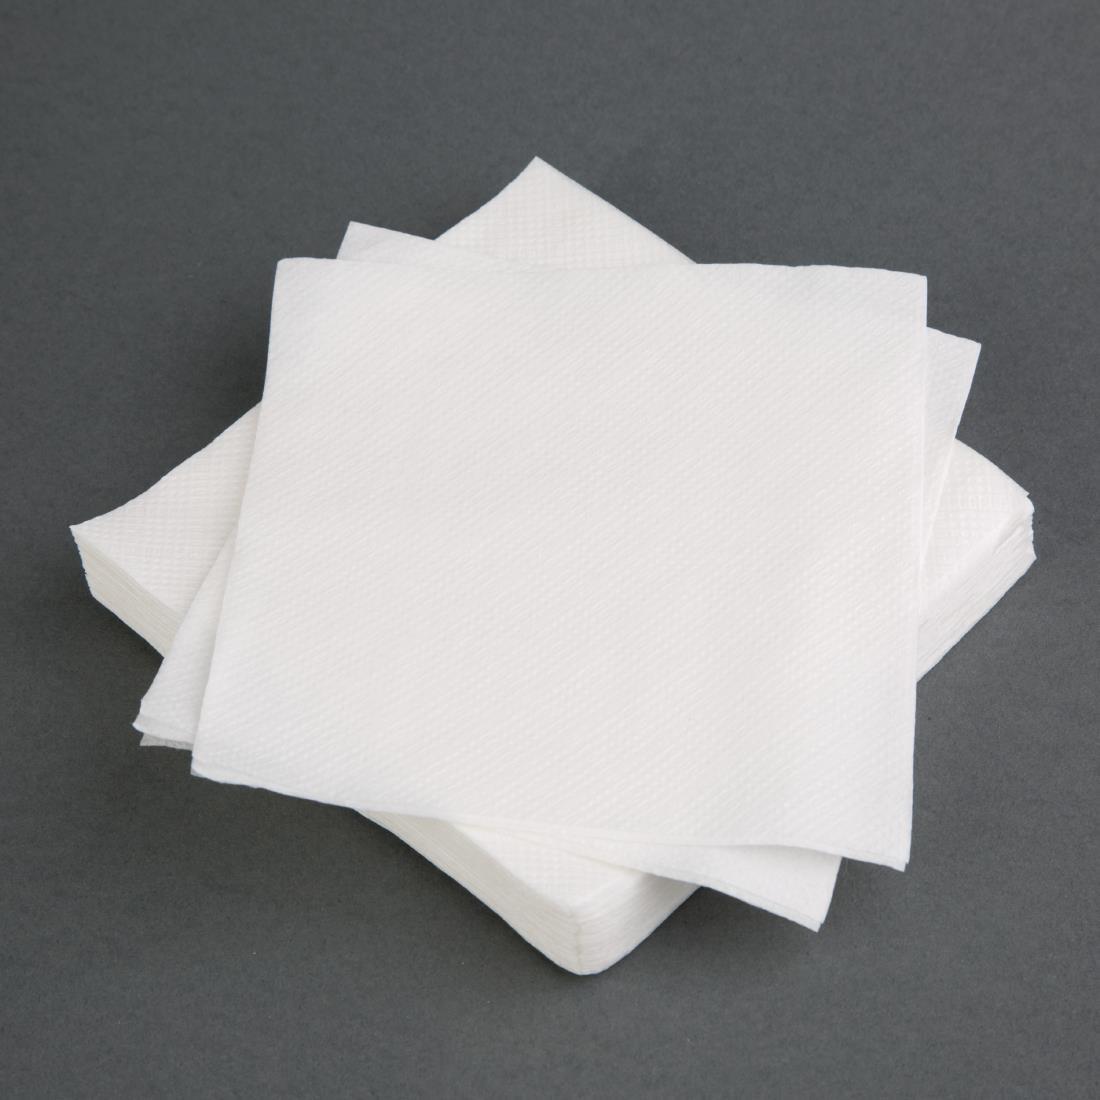 Fiesta Recyclable Cocktail Napkin White 24x24cm 1ply 1/4 Fold (Pack of 2000) - CM560  - 4